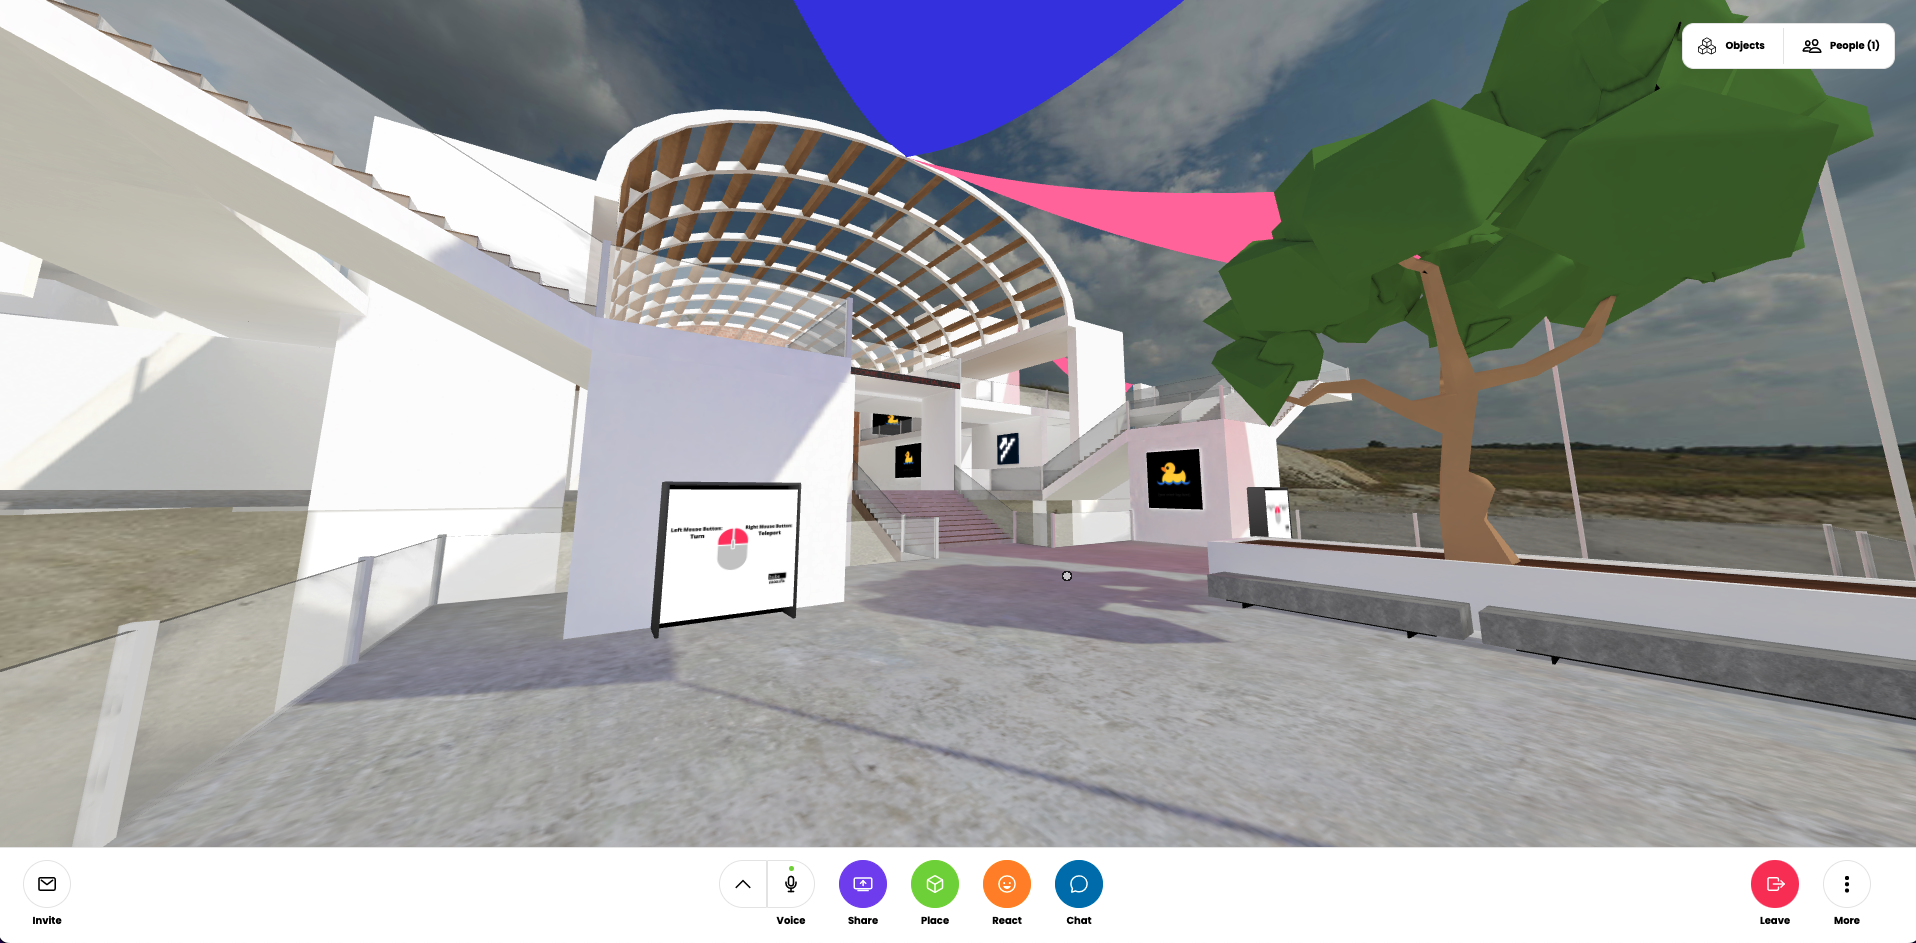 A 3D virtual reality environment of a gallery placed on a beach, viewed in Mozilla Hubs